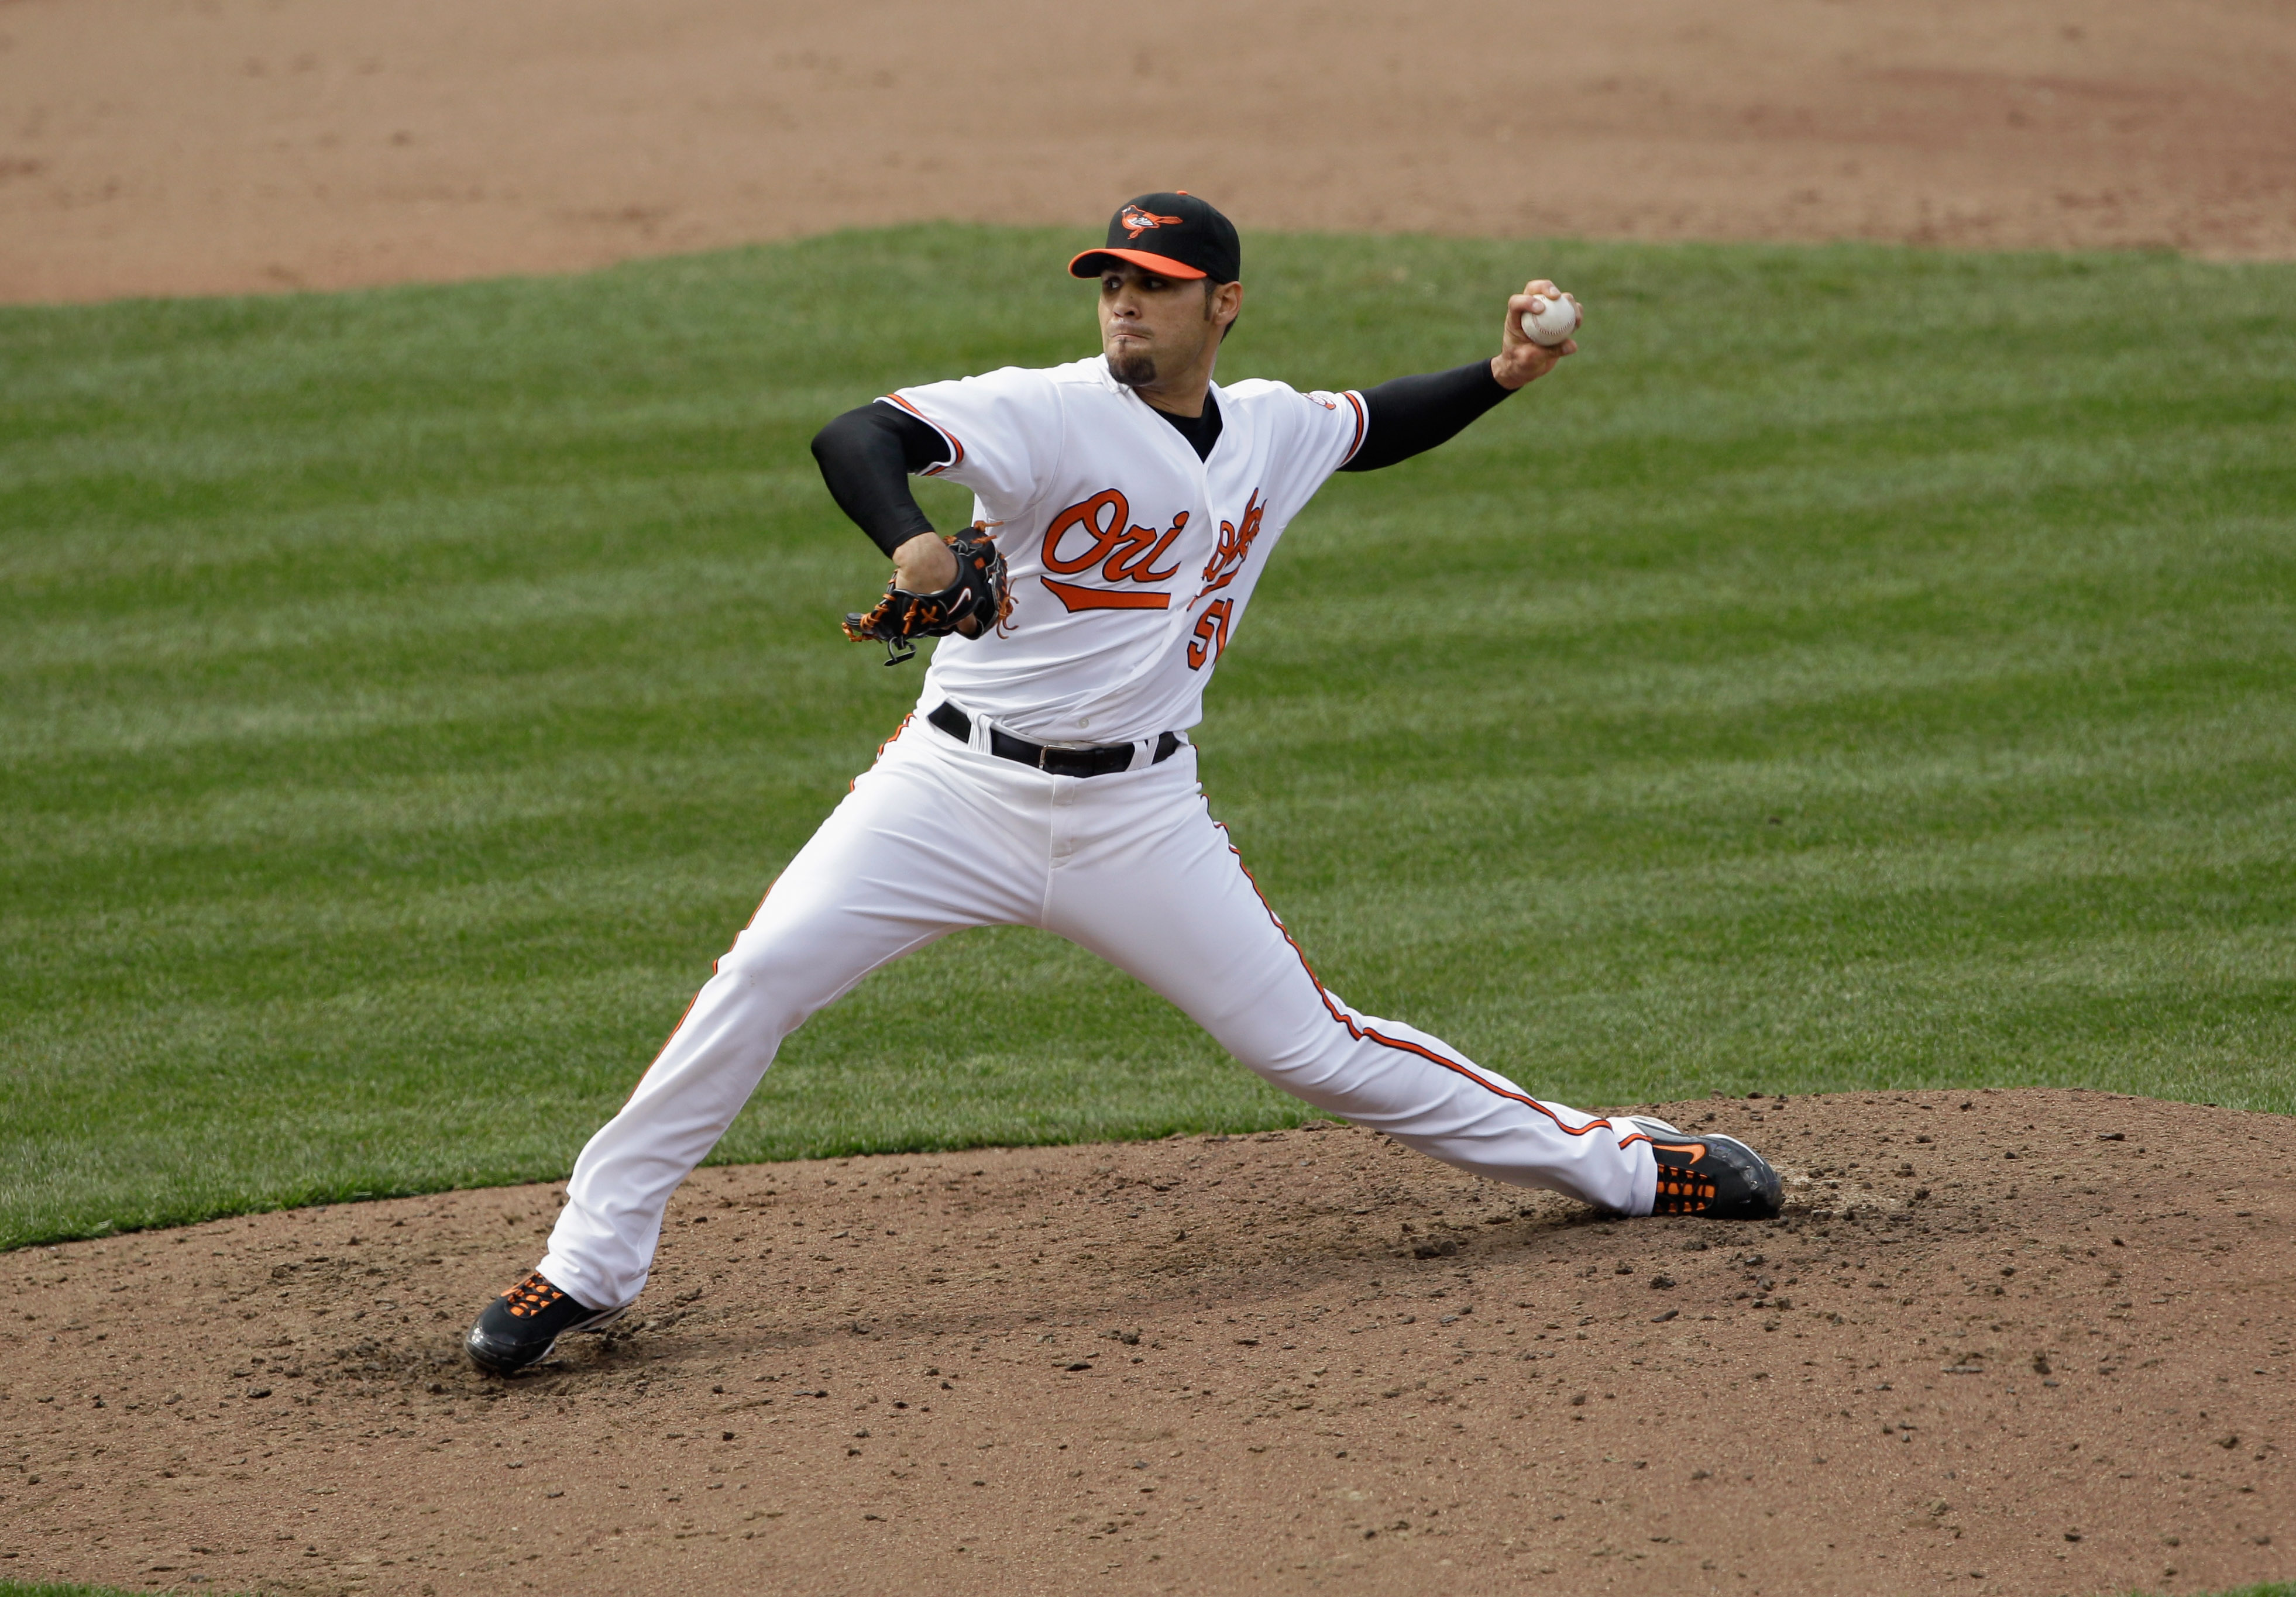 BALTIMORE, MD - APRIL 10:  Pitcher Mike Gonzalez #51 of the Baltimore Orioles delivers to a Texas Rangers batter at Oriole Park at Camden Yards on April 10, 2011 in Baltimore, Maryland.  (Photo by Rob Carr/Getty Images)